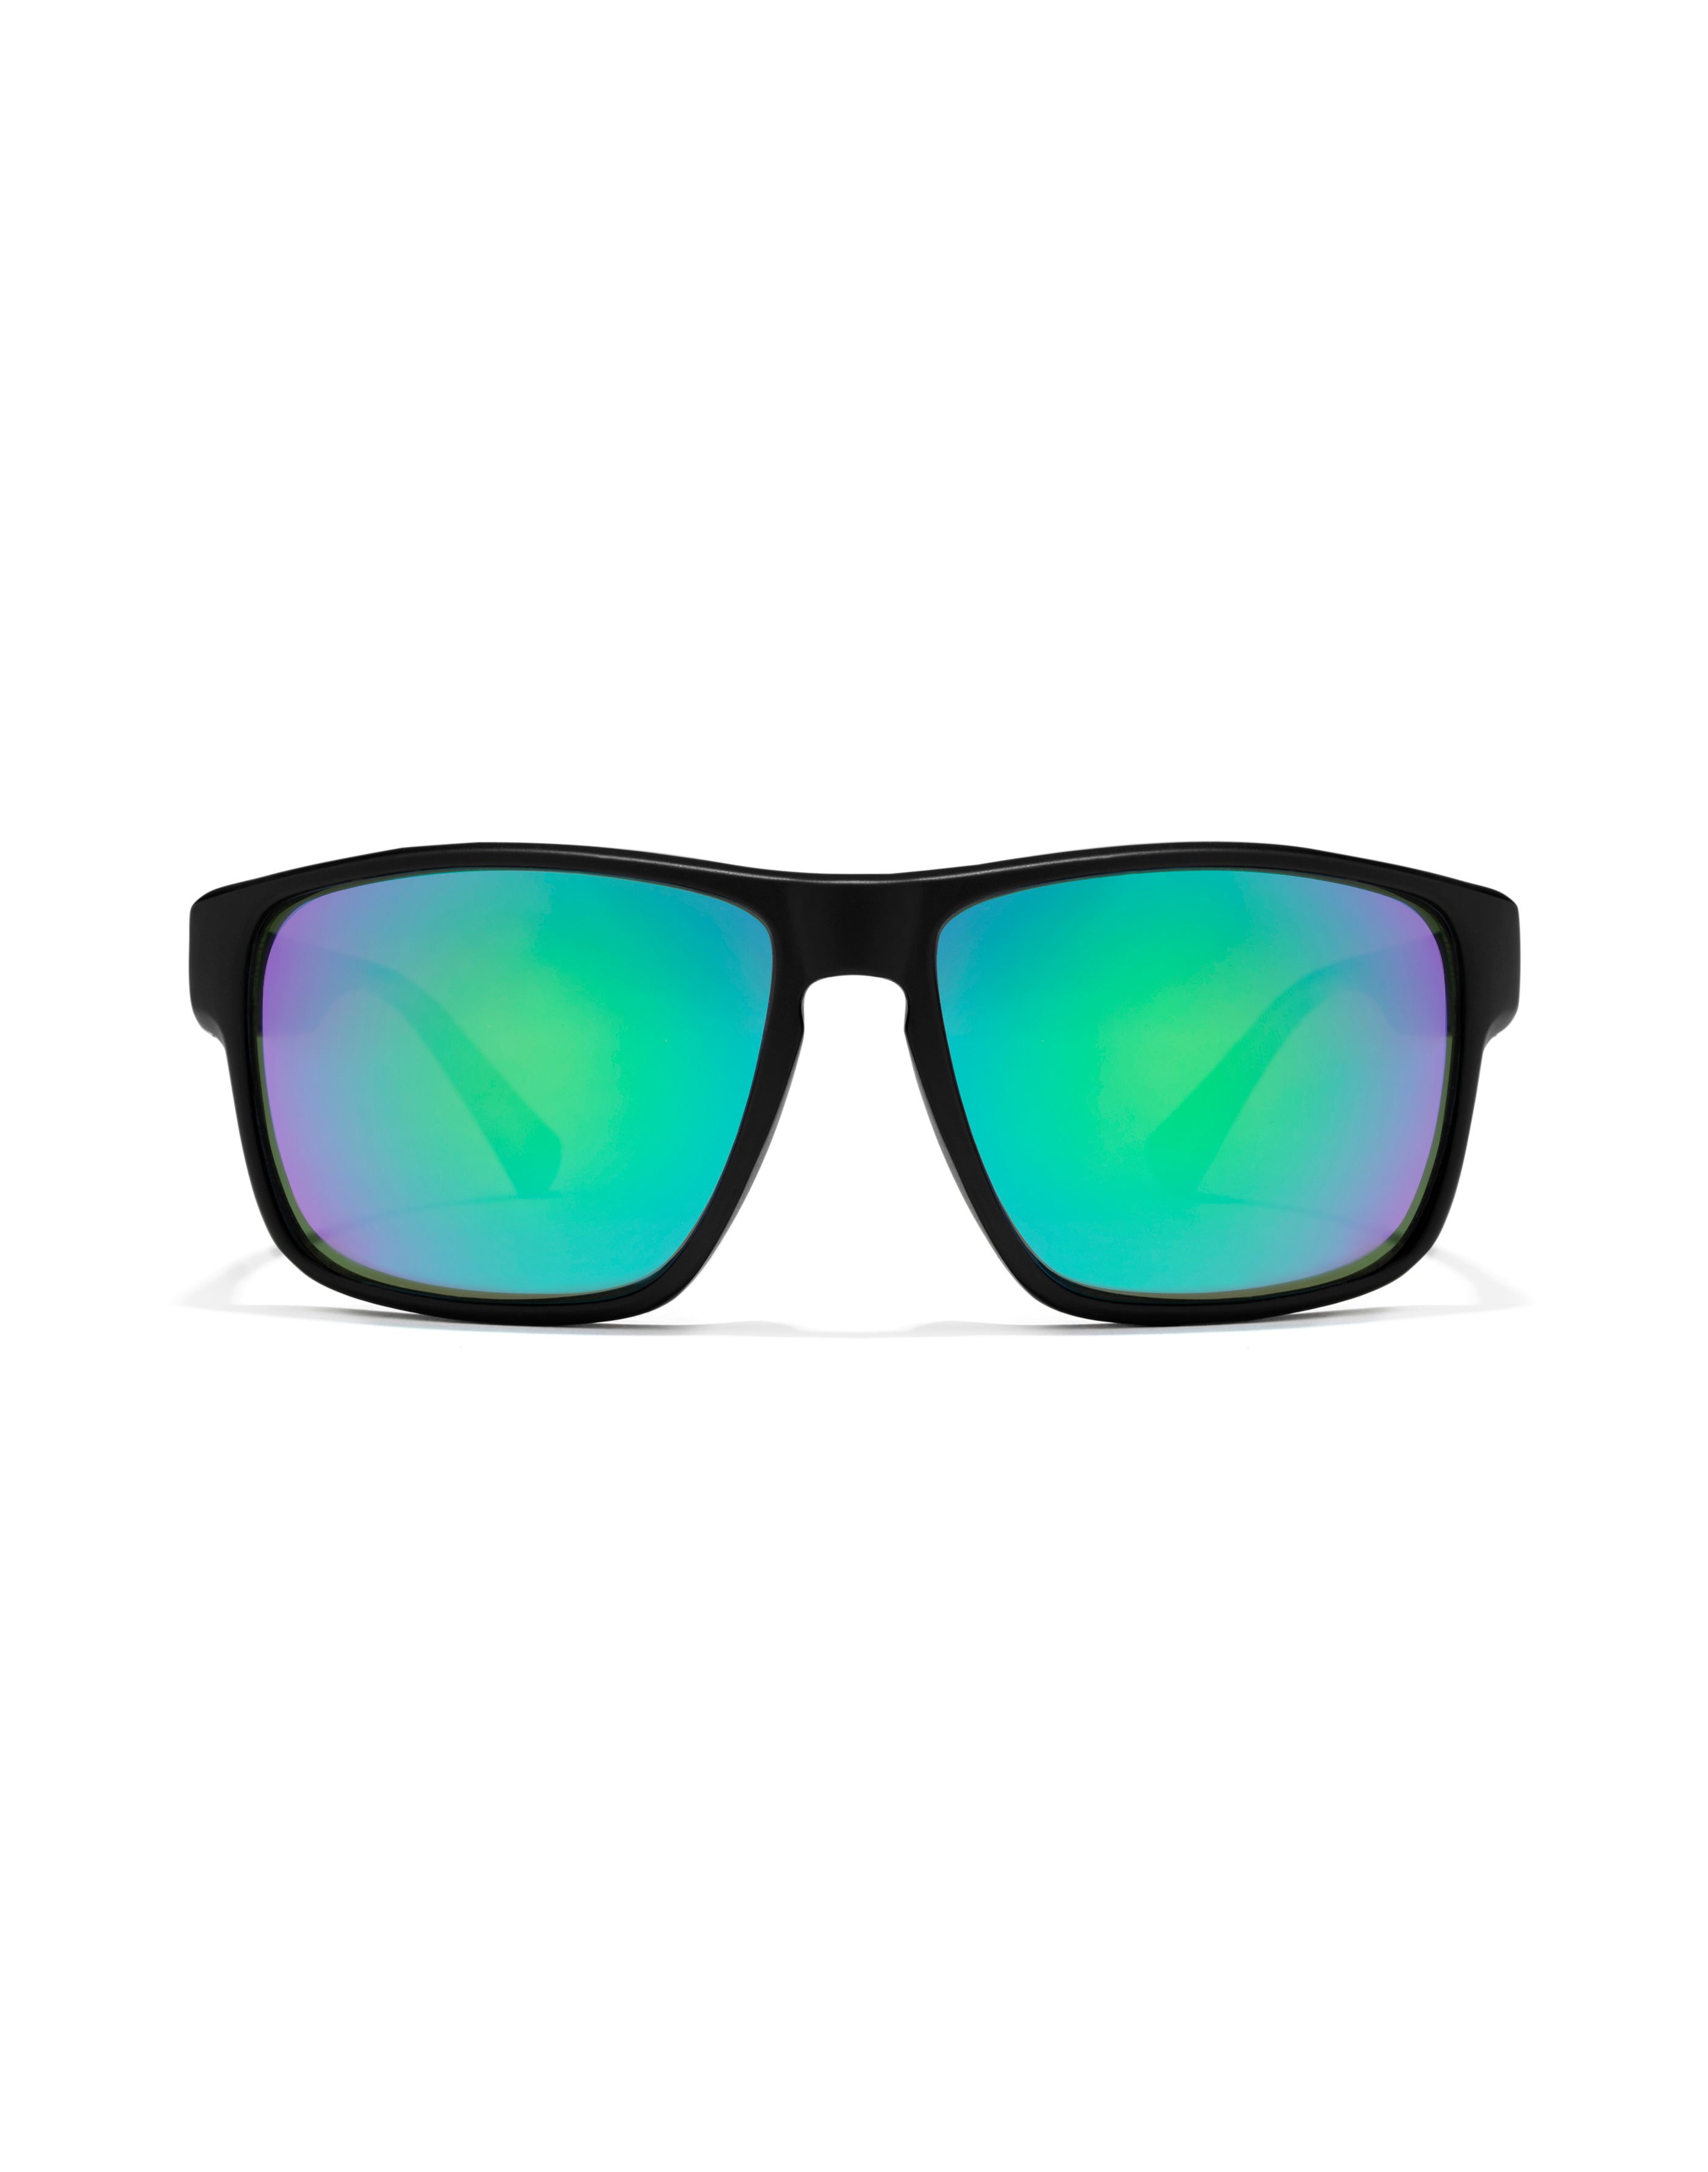 HAWKERS - FASTER POLARIZED Black Emerald For Men and Women UV400